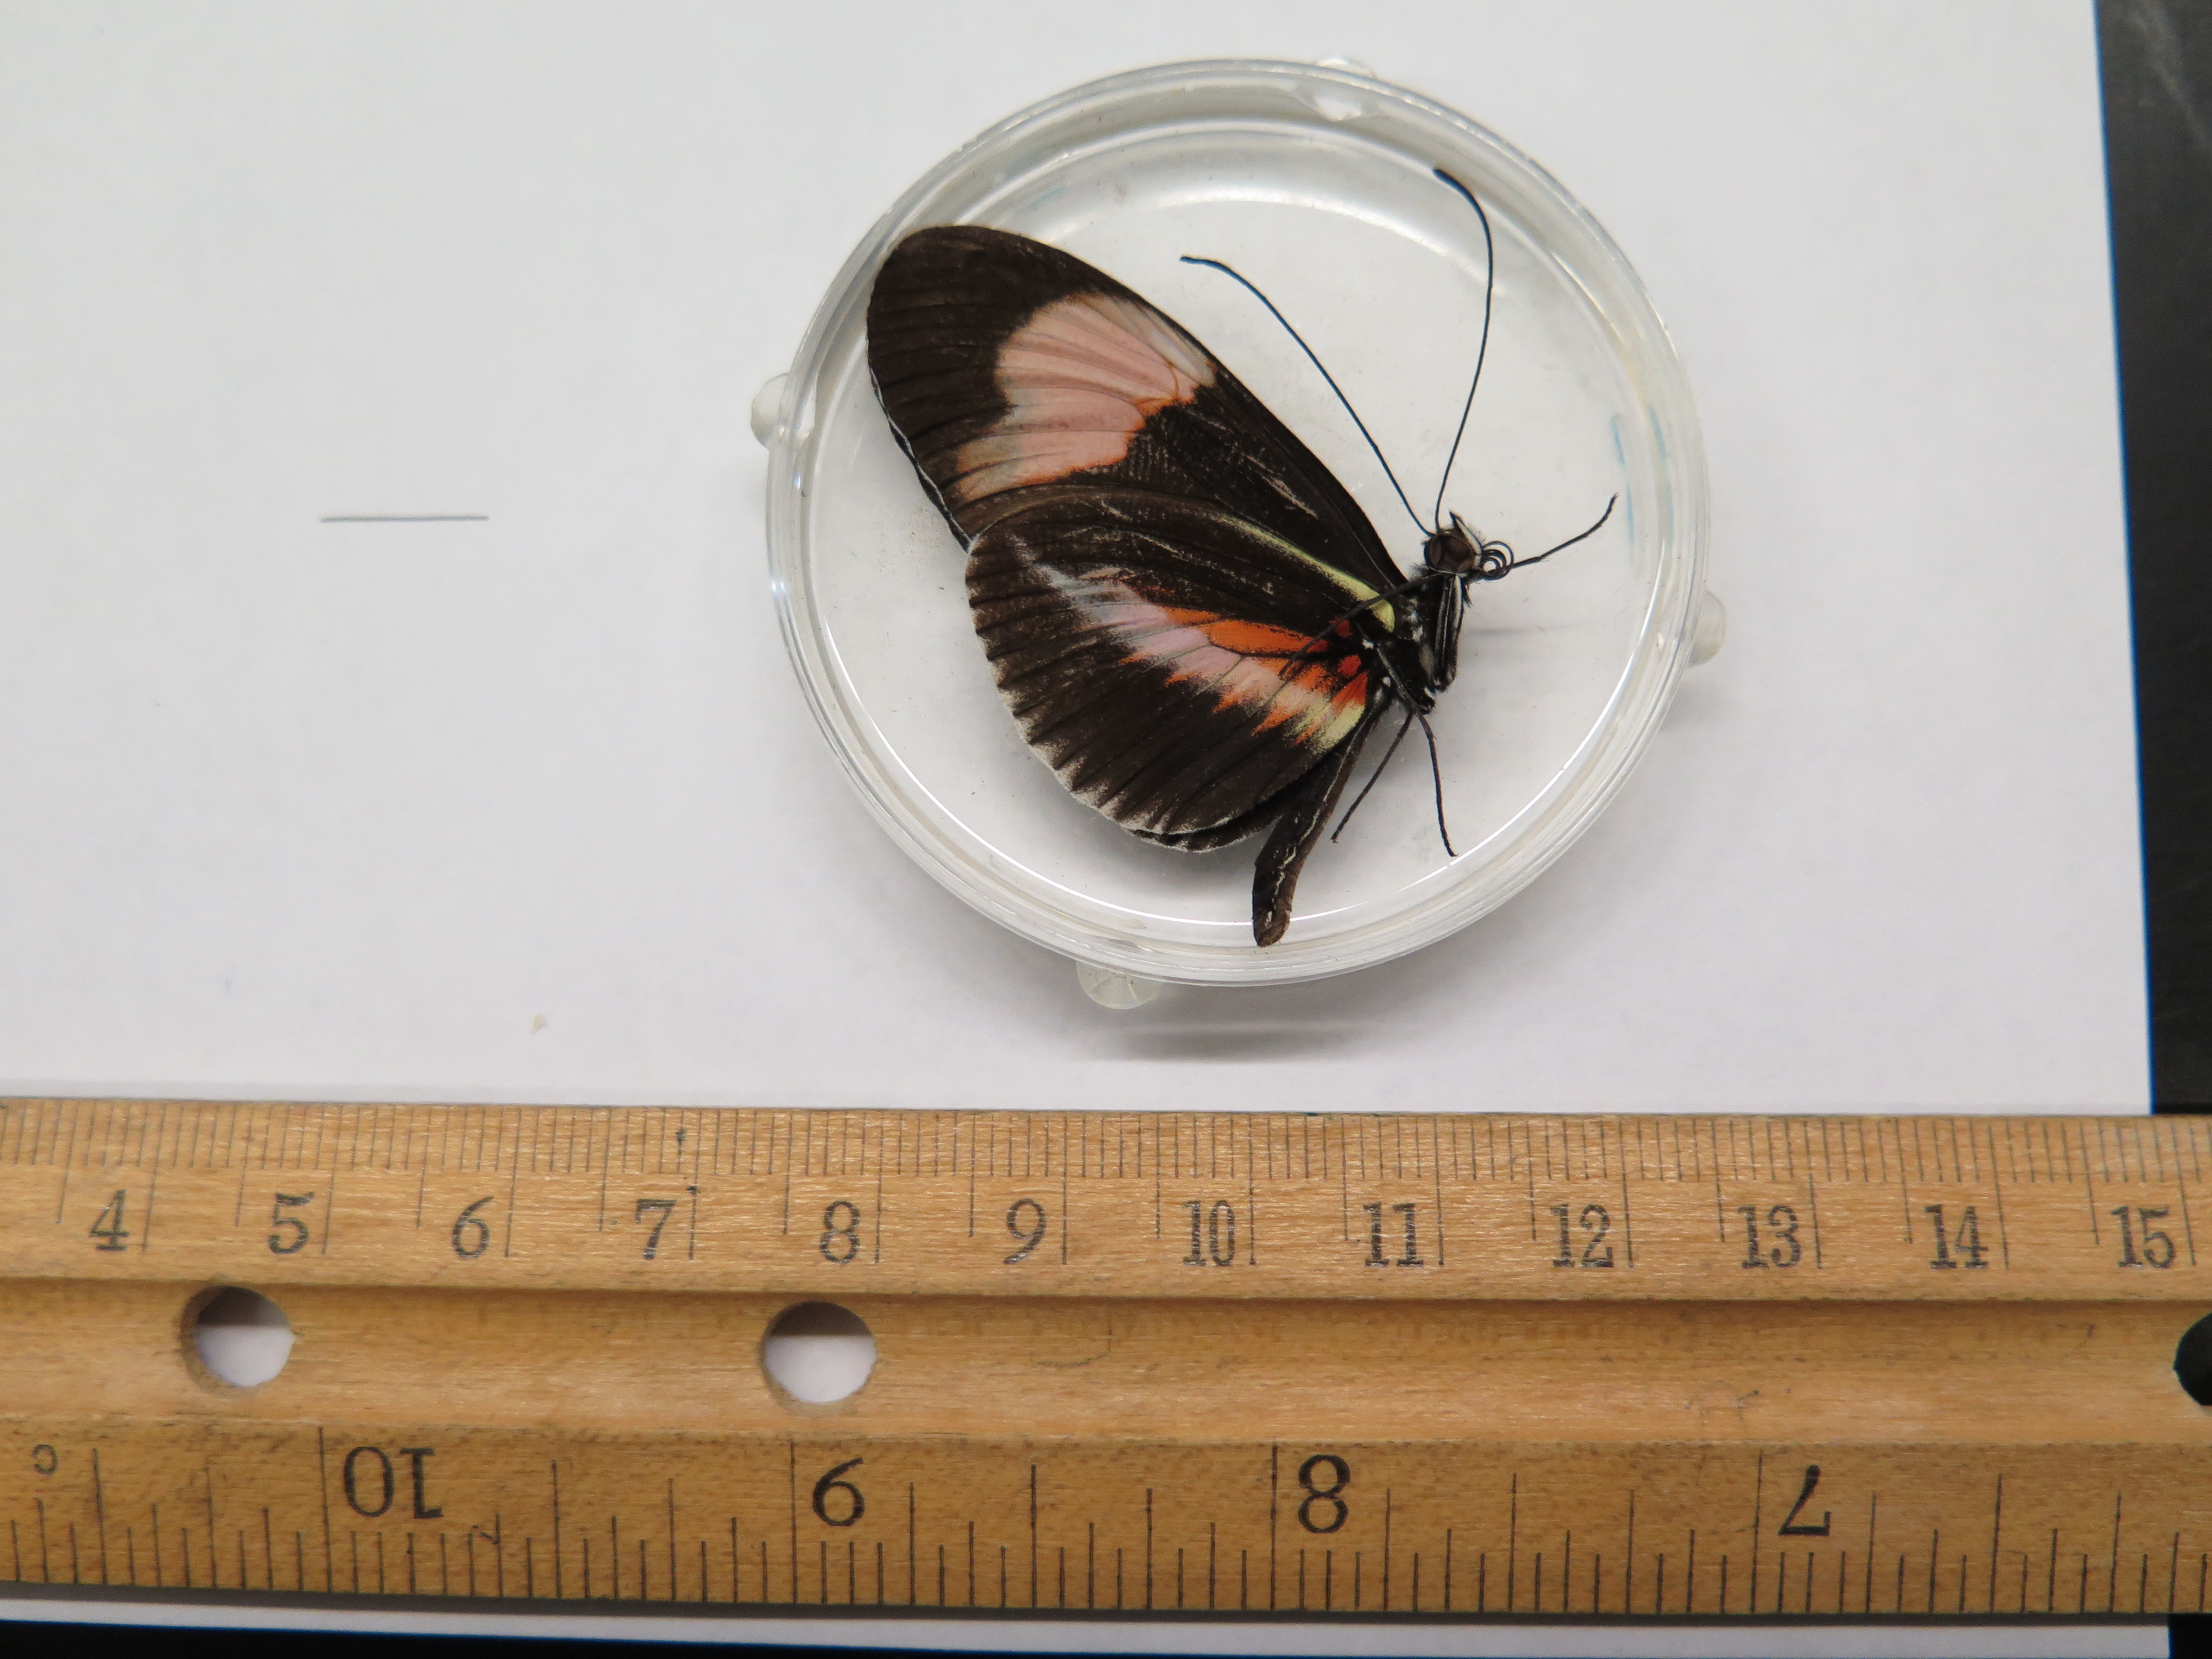 Butterfly being measured